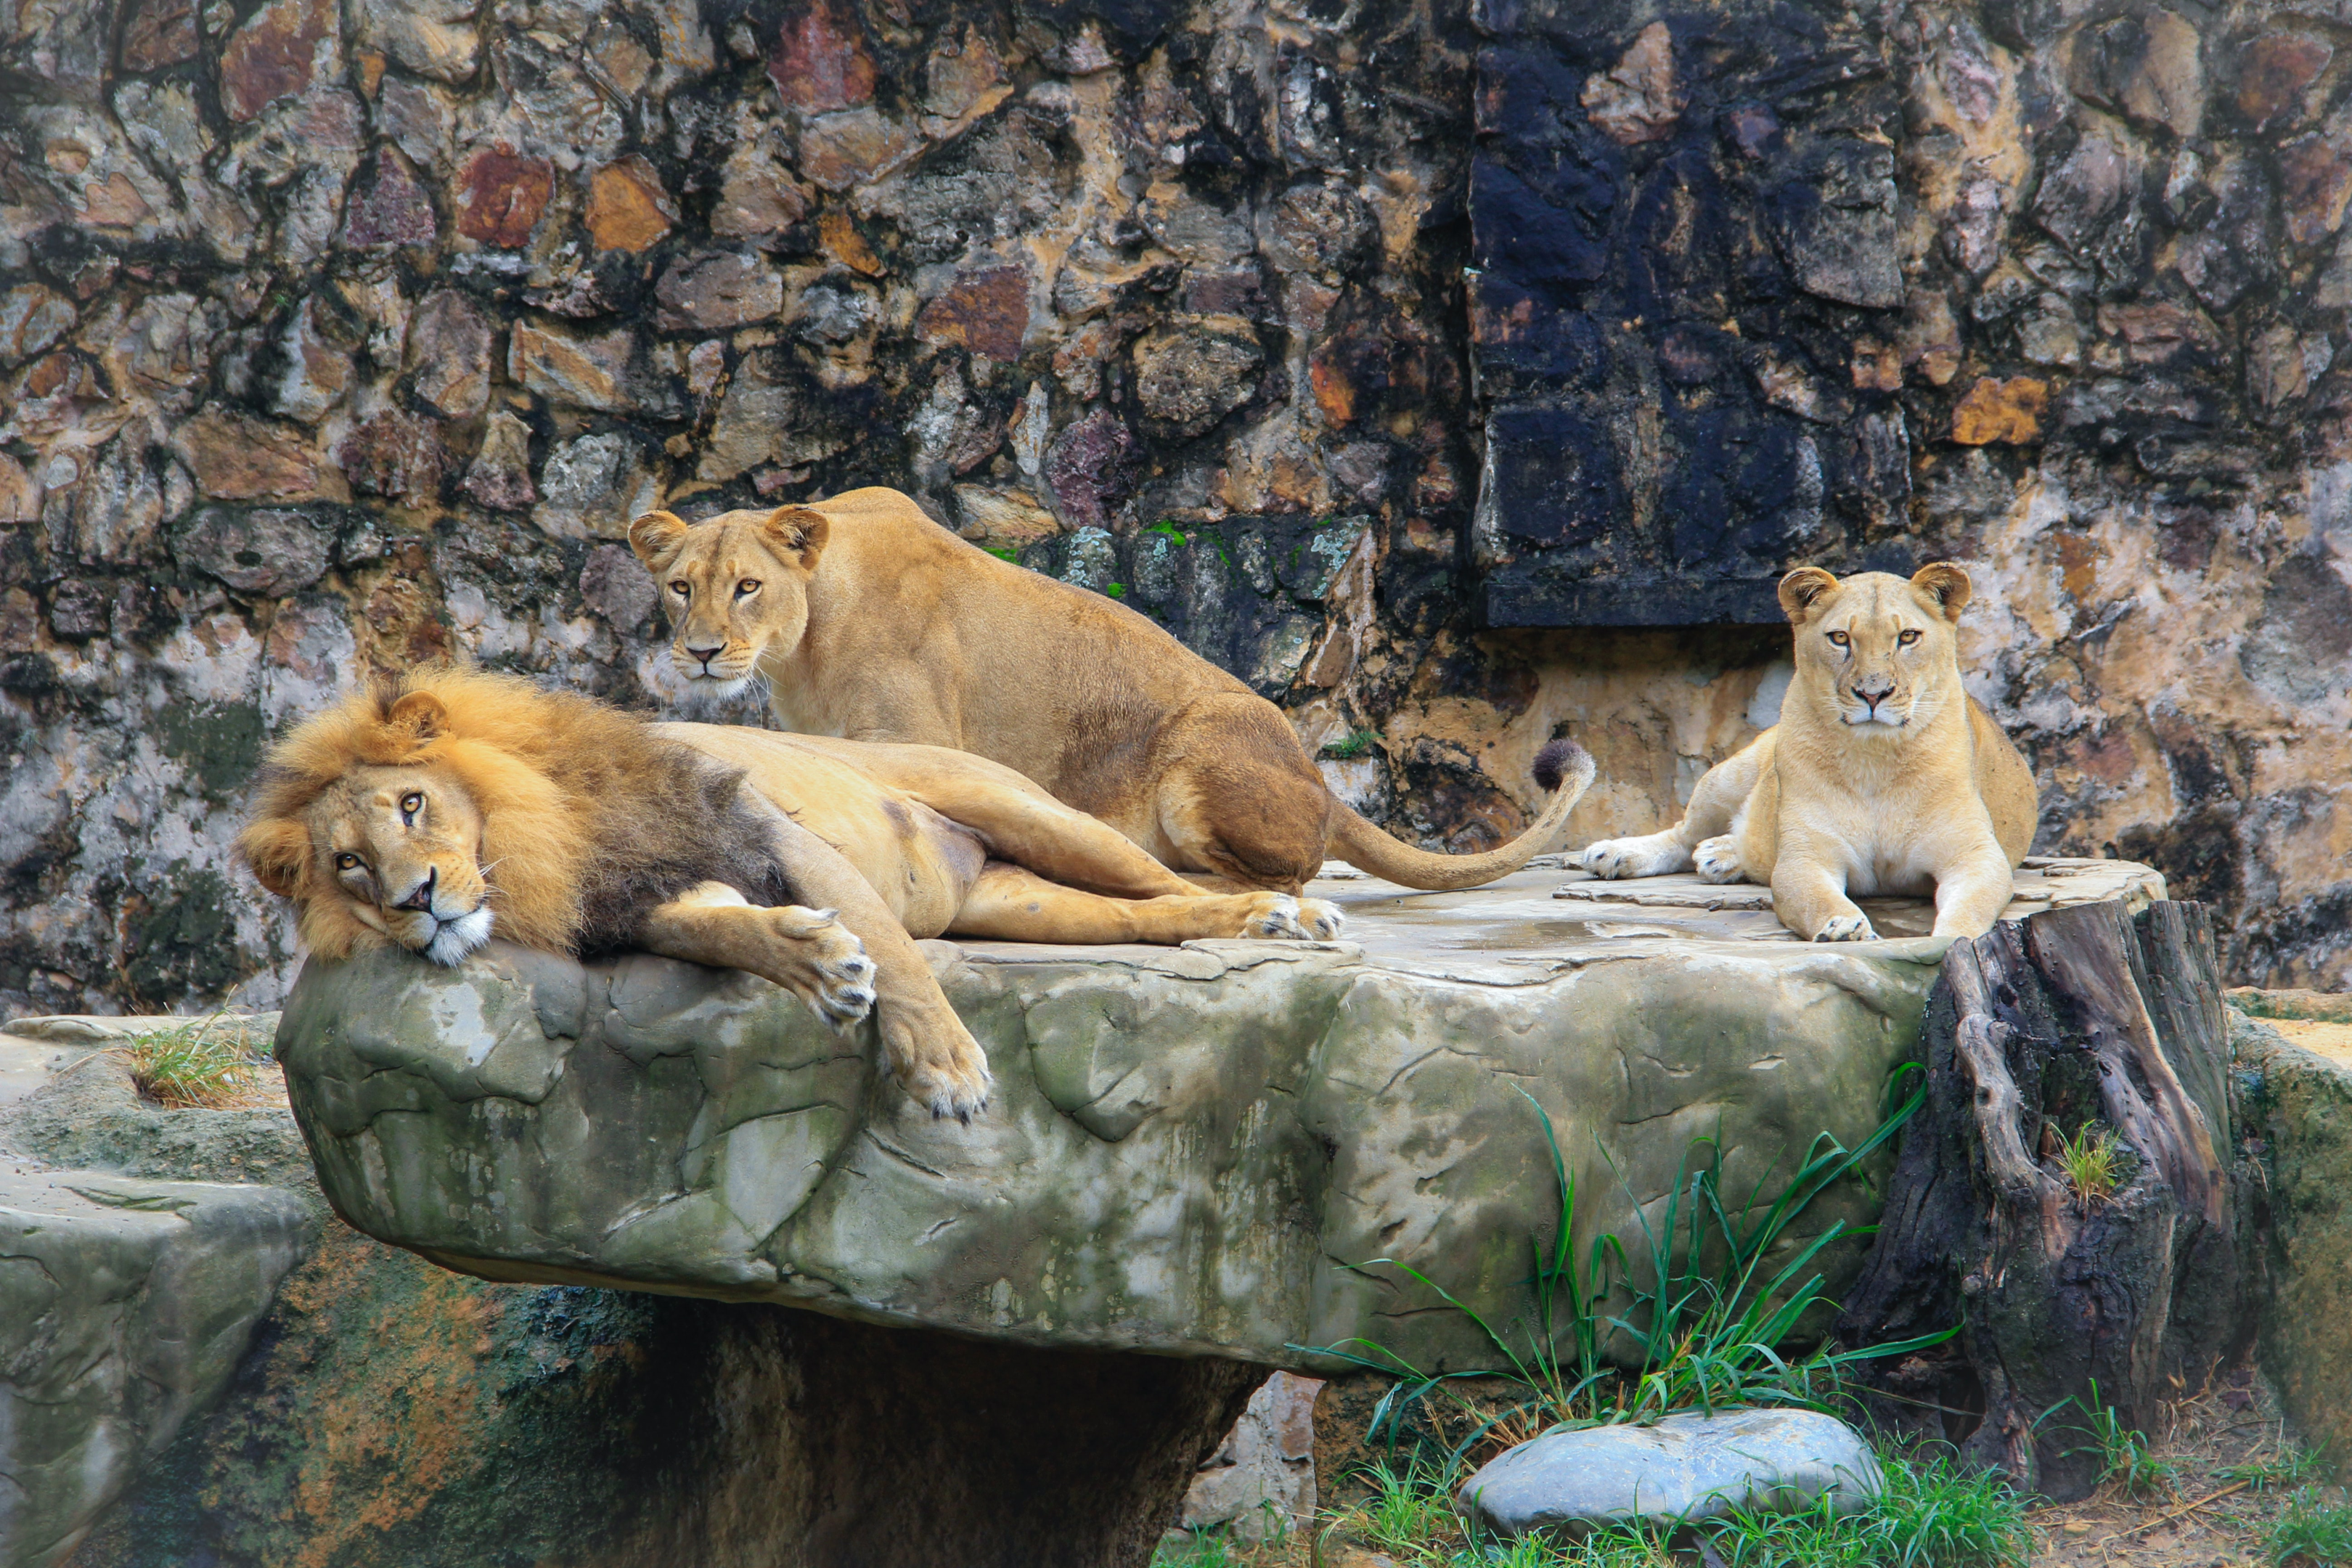 African Lions in a naturalistic enclosure